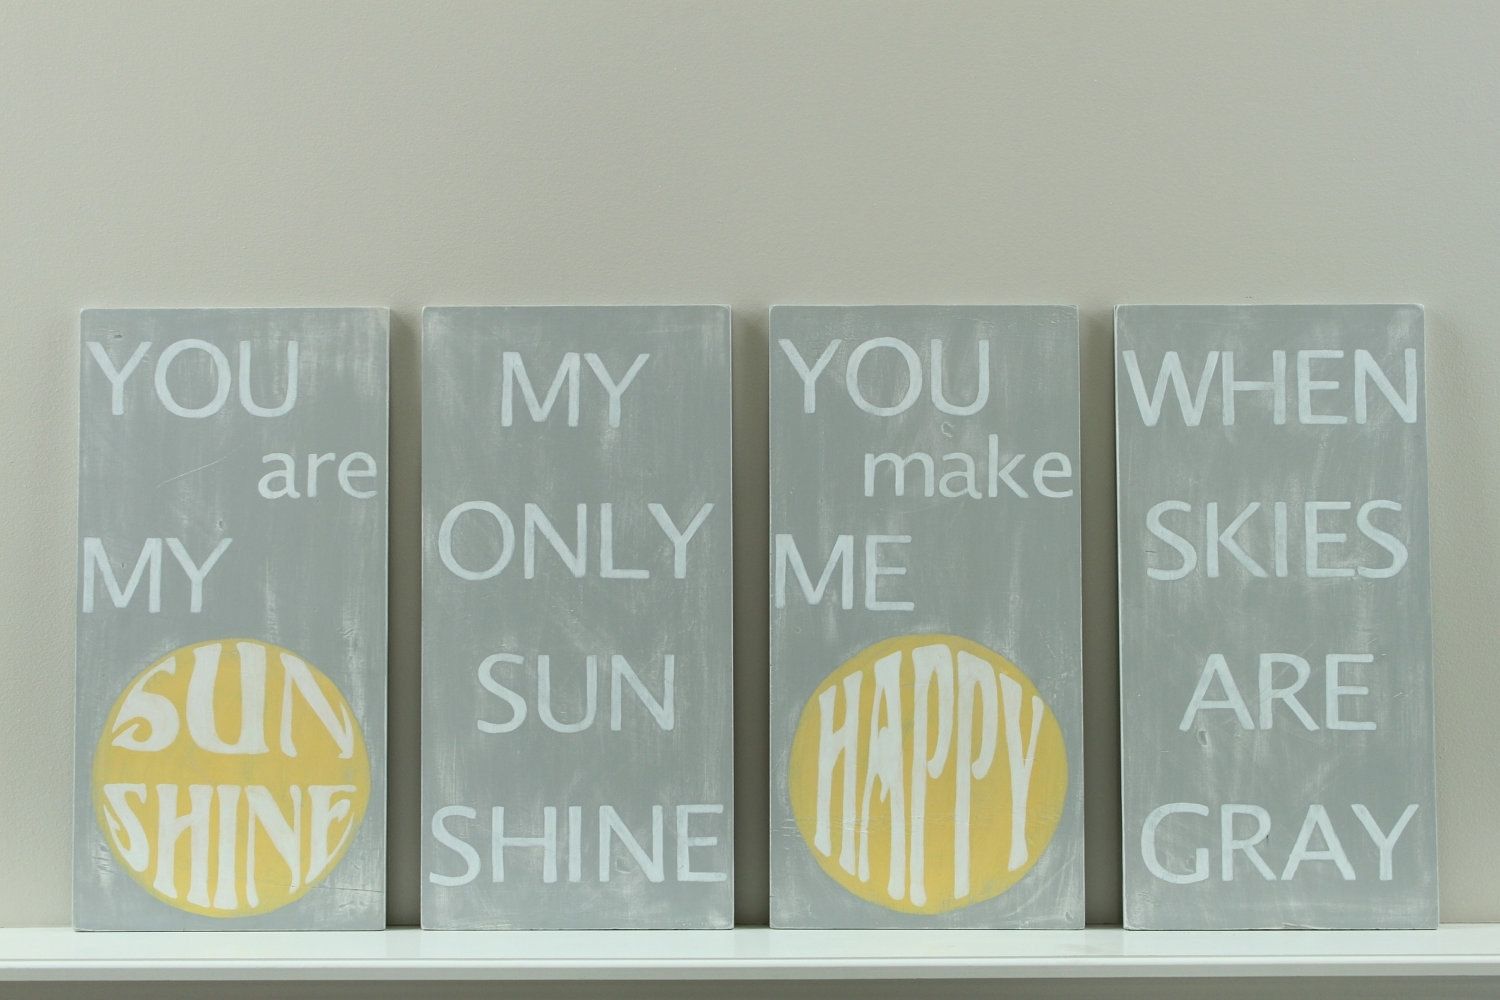 You Are My Sunshine Wall Art Pics Of You Are My Sunshine Wall Art Within Current You Are My Sunshine Wall Art (View 10 of 15)